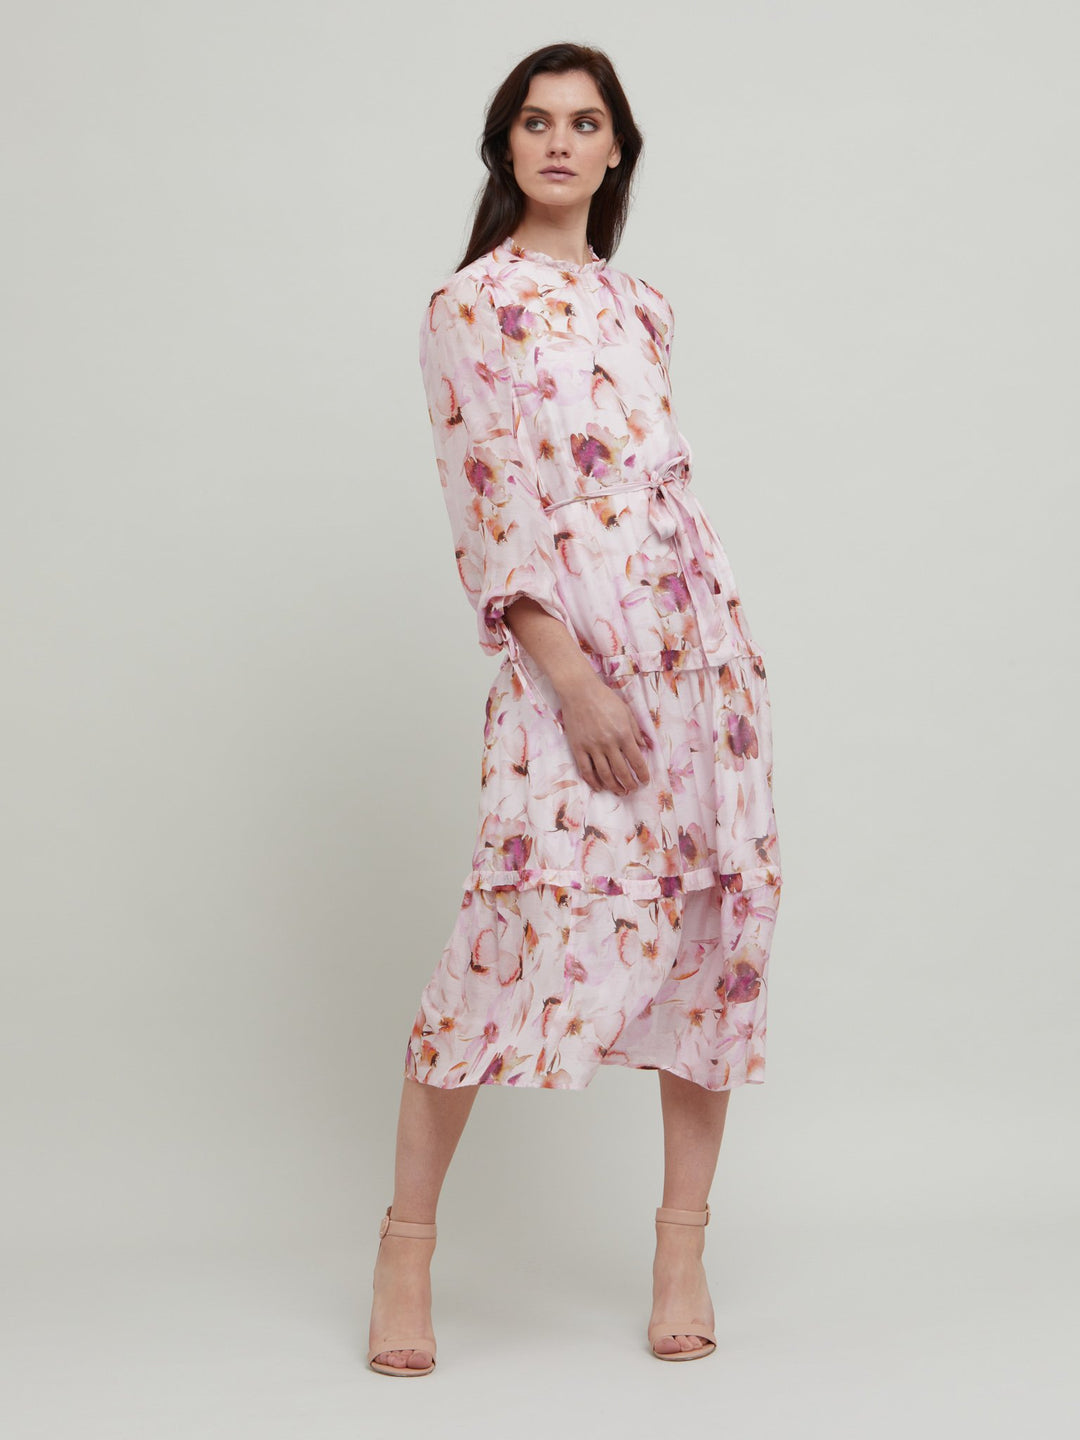 Meet Flo, a super feminine silhouette with pleated jewel neckline, keyhole back, full sleeves that fall to an elasticated cuff with tie detail. Tiered skirt falls to below the knee. The dress can be worn with or without the belt. Crafted in our super soft silk in a delicate watercolour floral print. Perfect for summer weddings, garden parties or wherever you'd like to make an entrance.